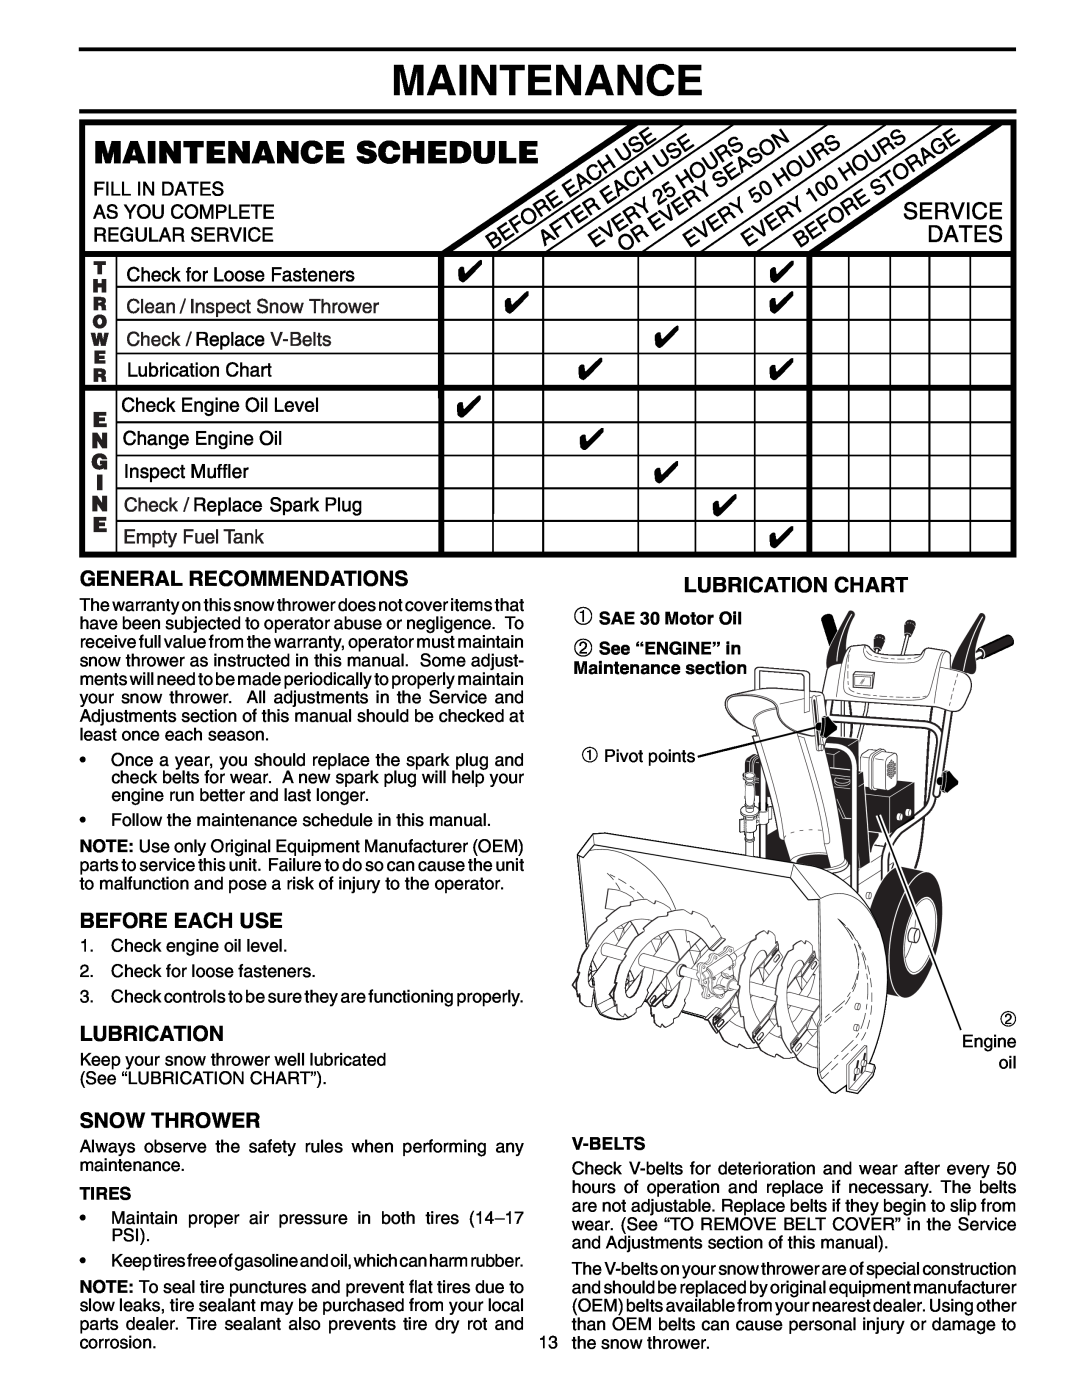 Poulan 401214 Maintenance, General Recommendations, Before Each Use, Lubrication Chart, Snow Thrower, Tires, V-Belts 